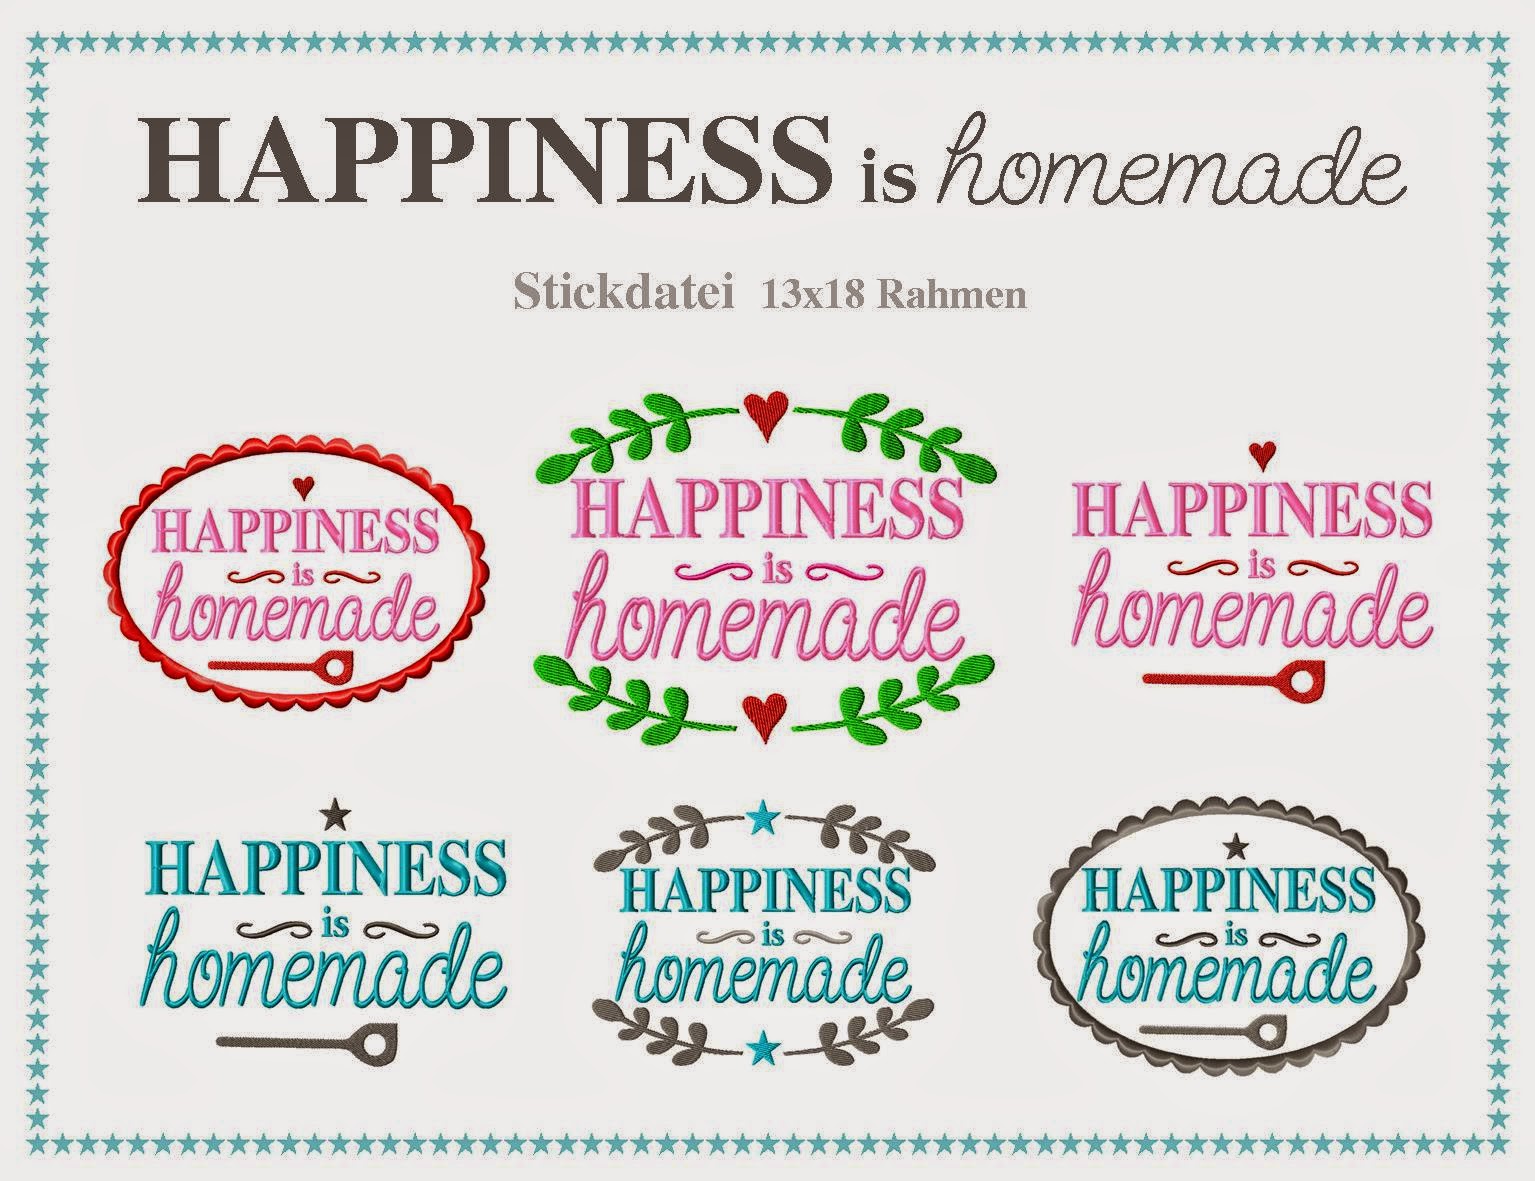 HAPPINESS is homemade